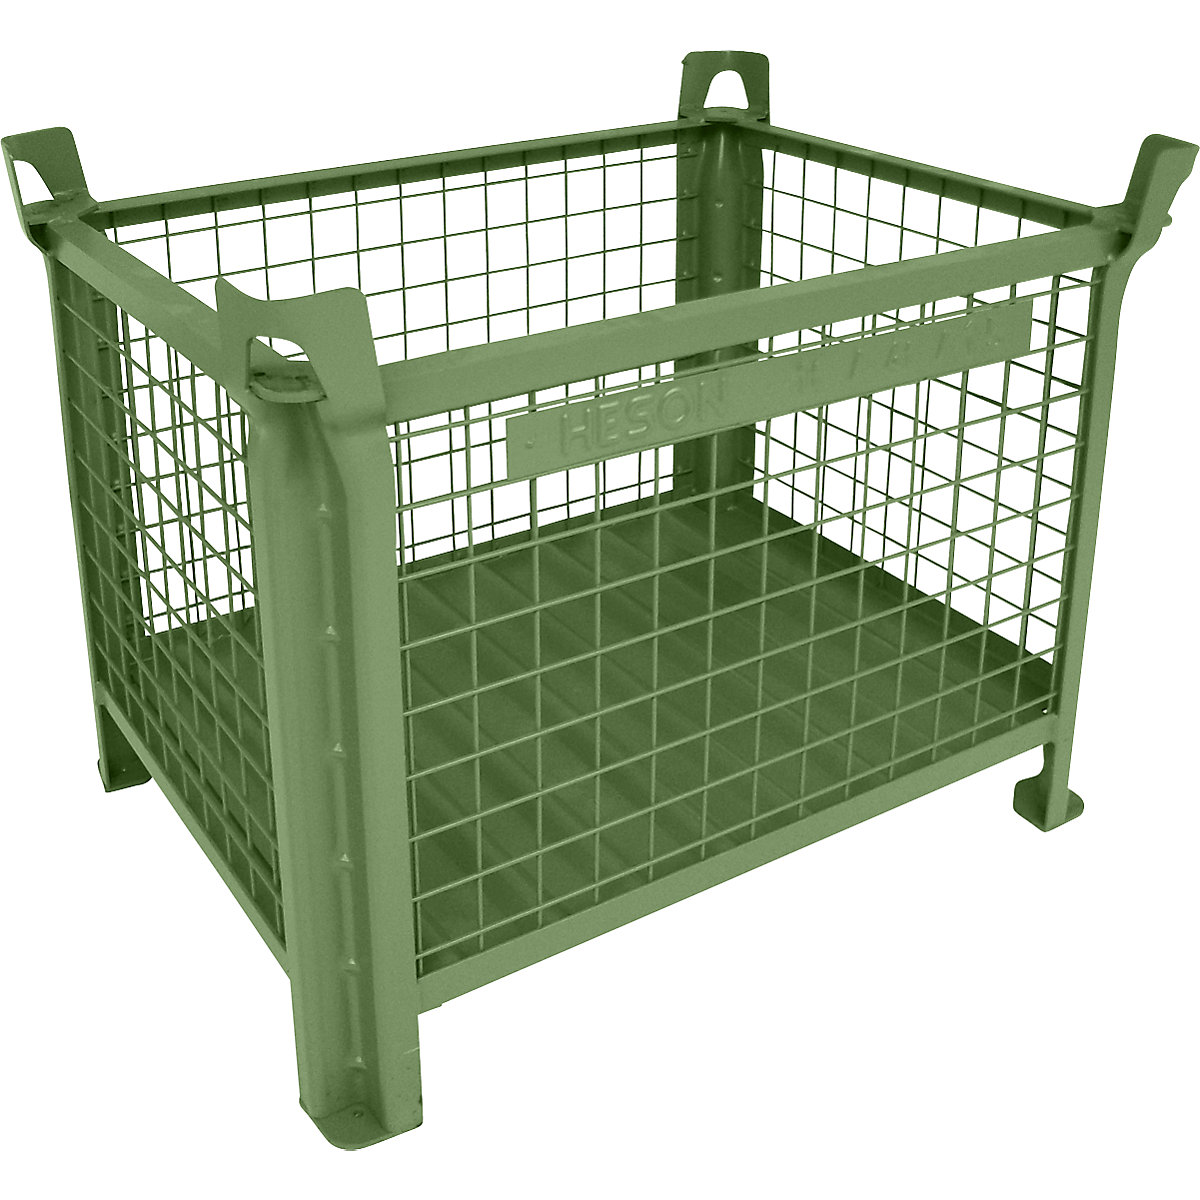 Box pallet with sheet steel base – Heson, LxW 800 x 600 mm, painted green, 10+ items-6